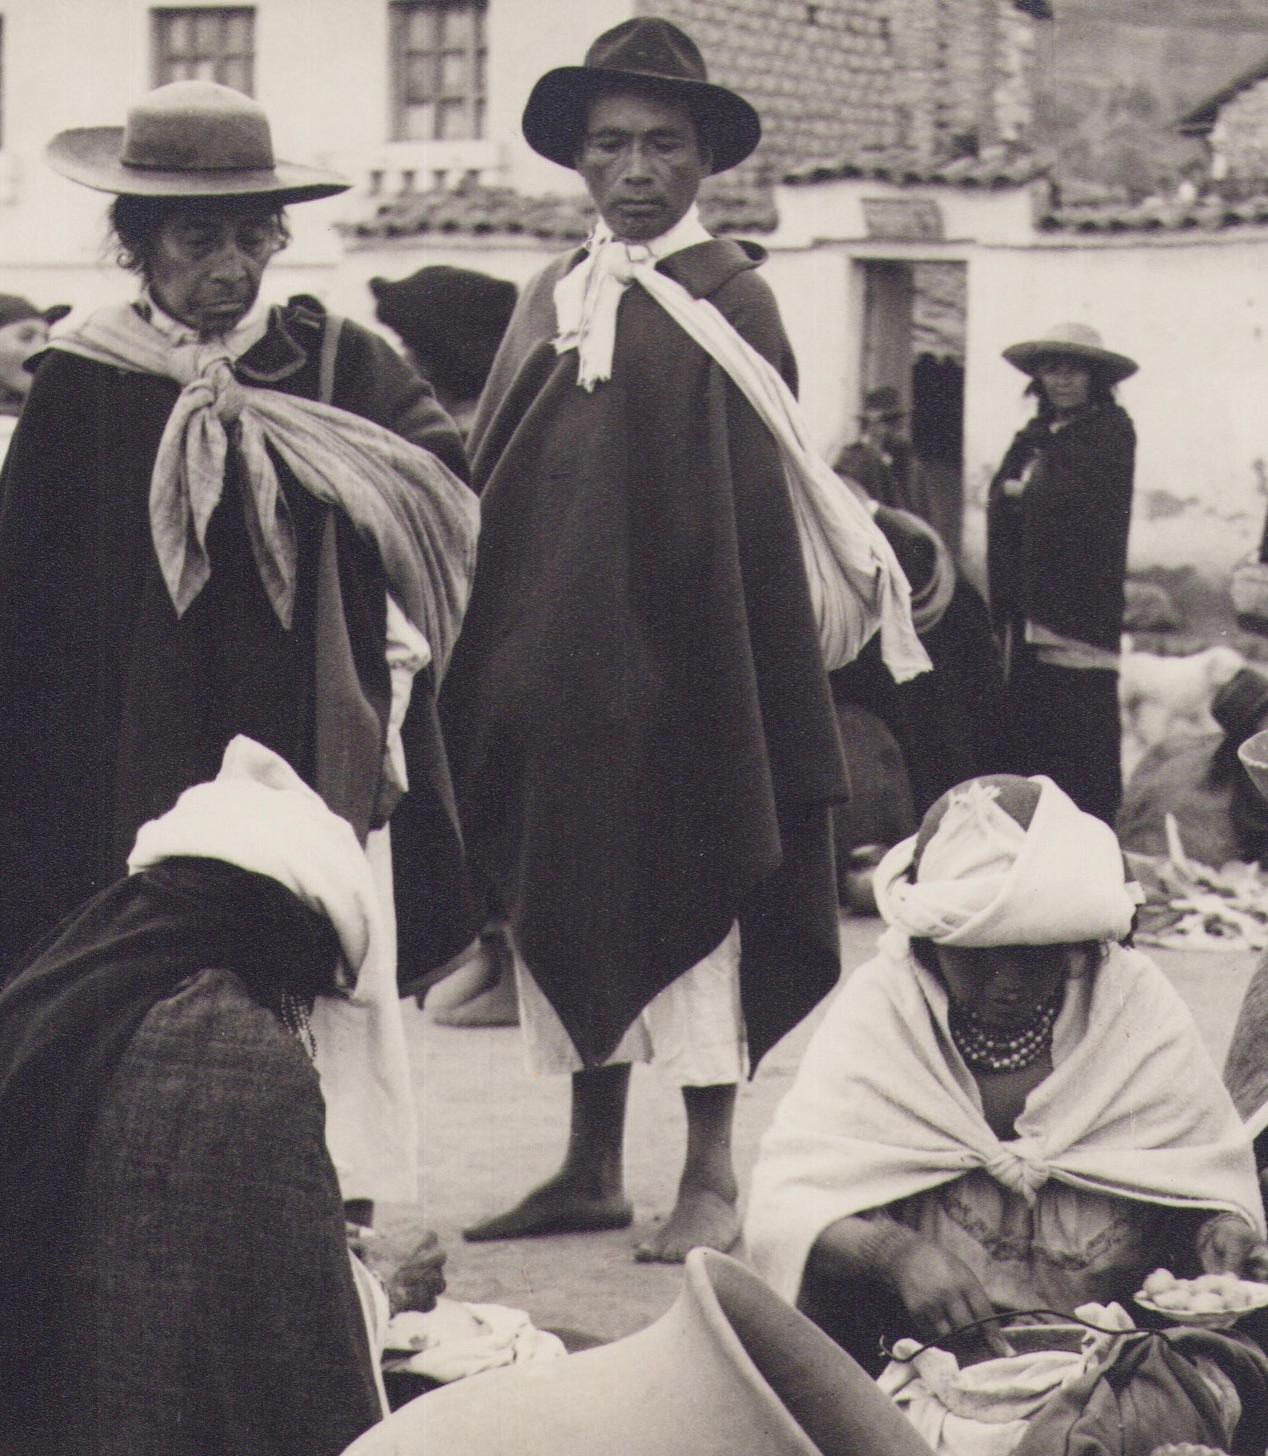 Ecuador, Sellers, Market, Black and White Photography, 1960s, 23, 3 x 16, 6 cm For Sale 1